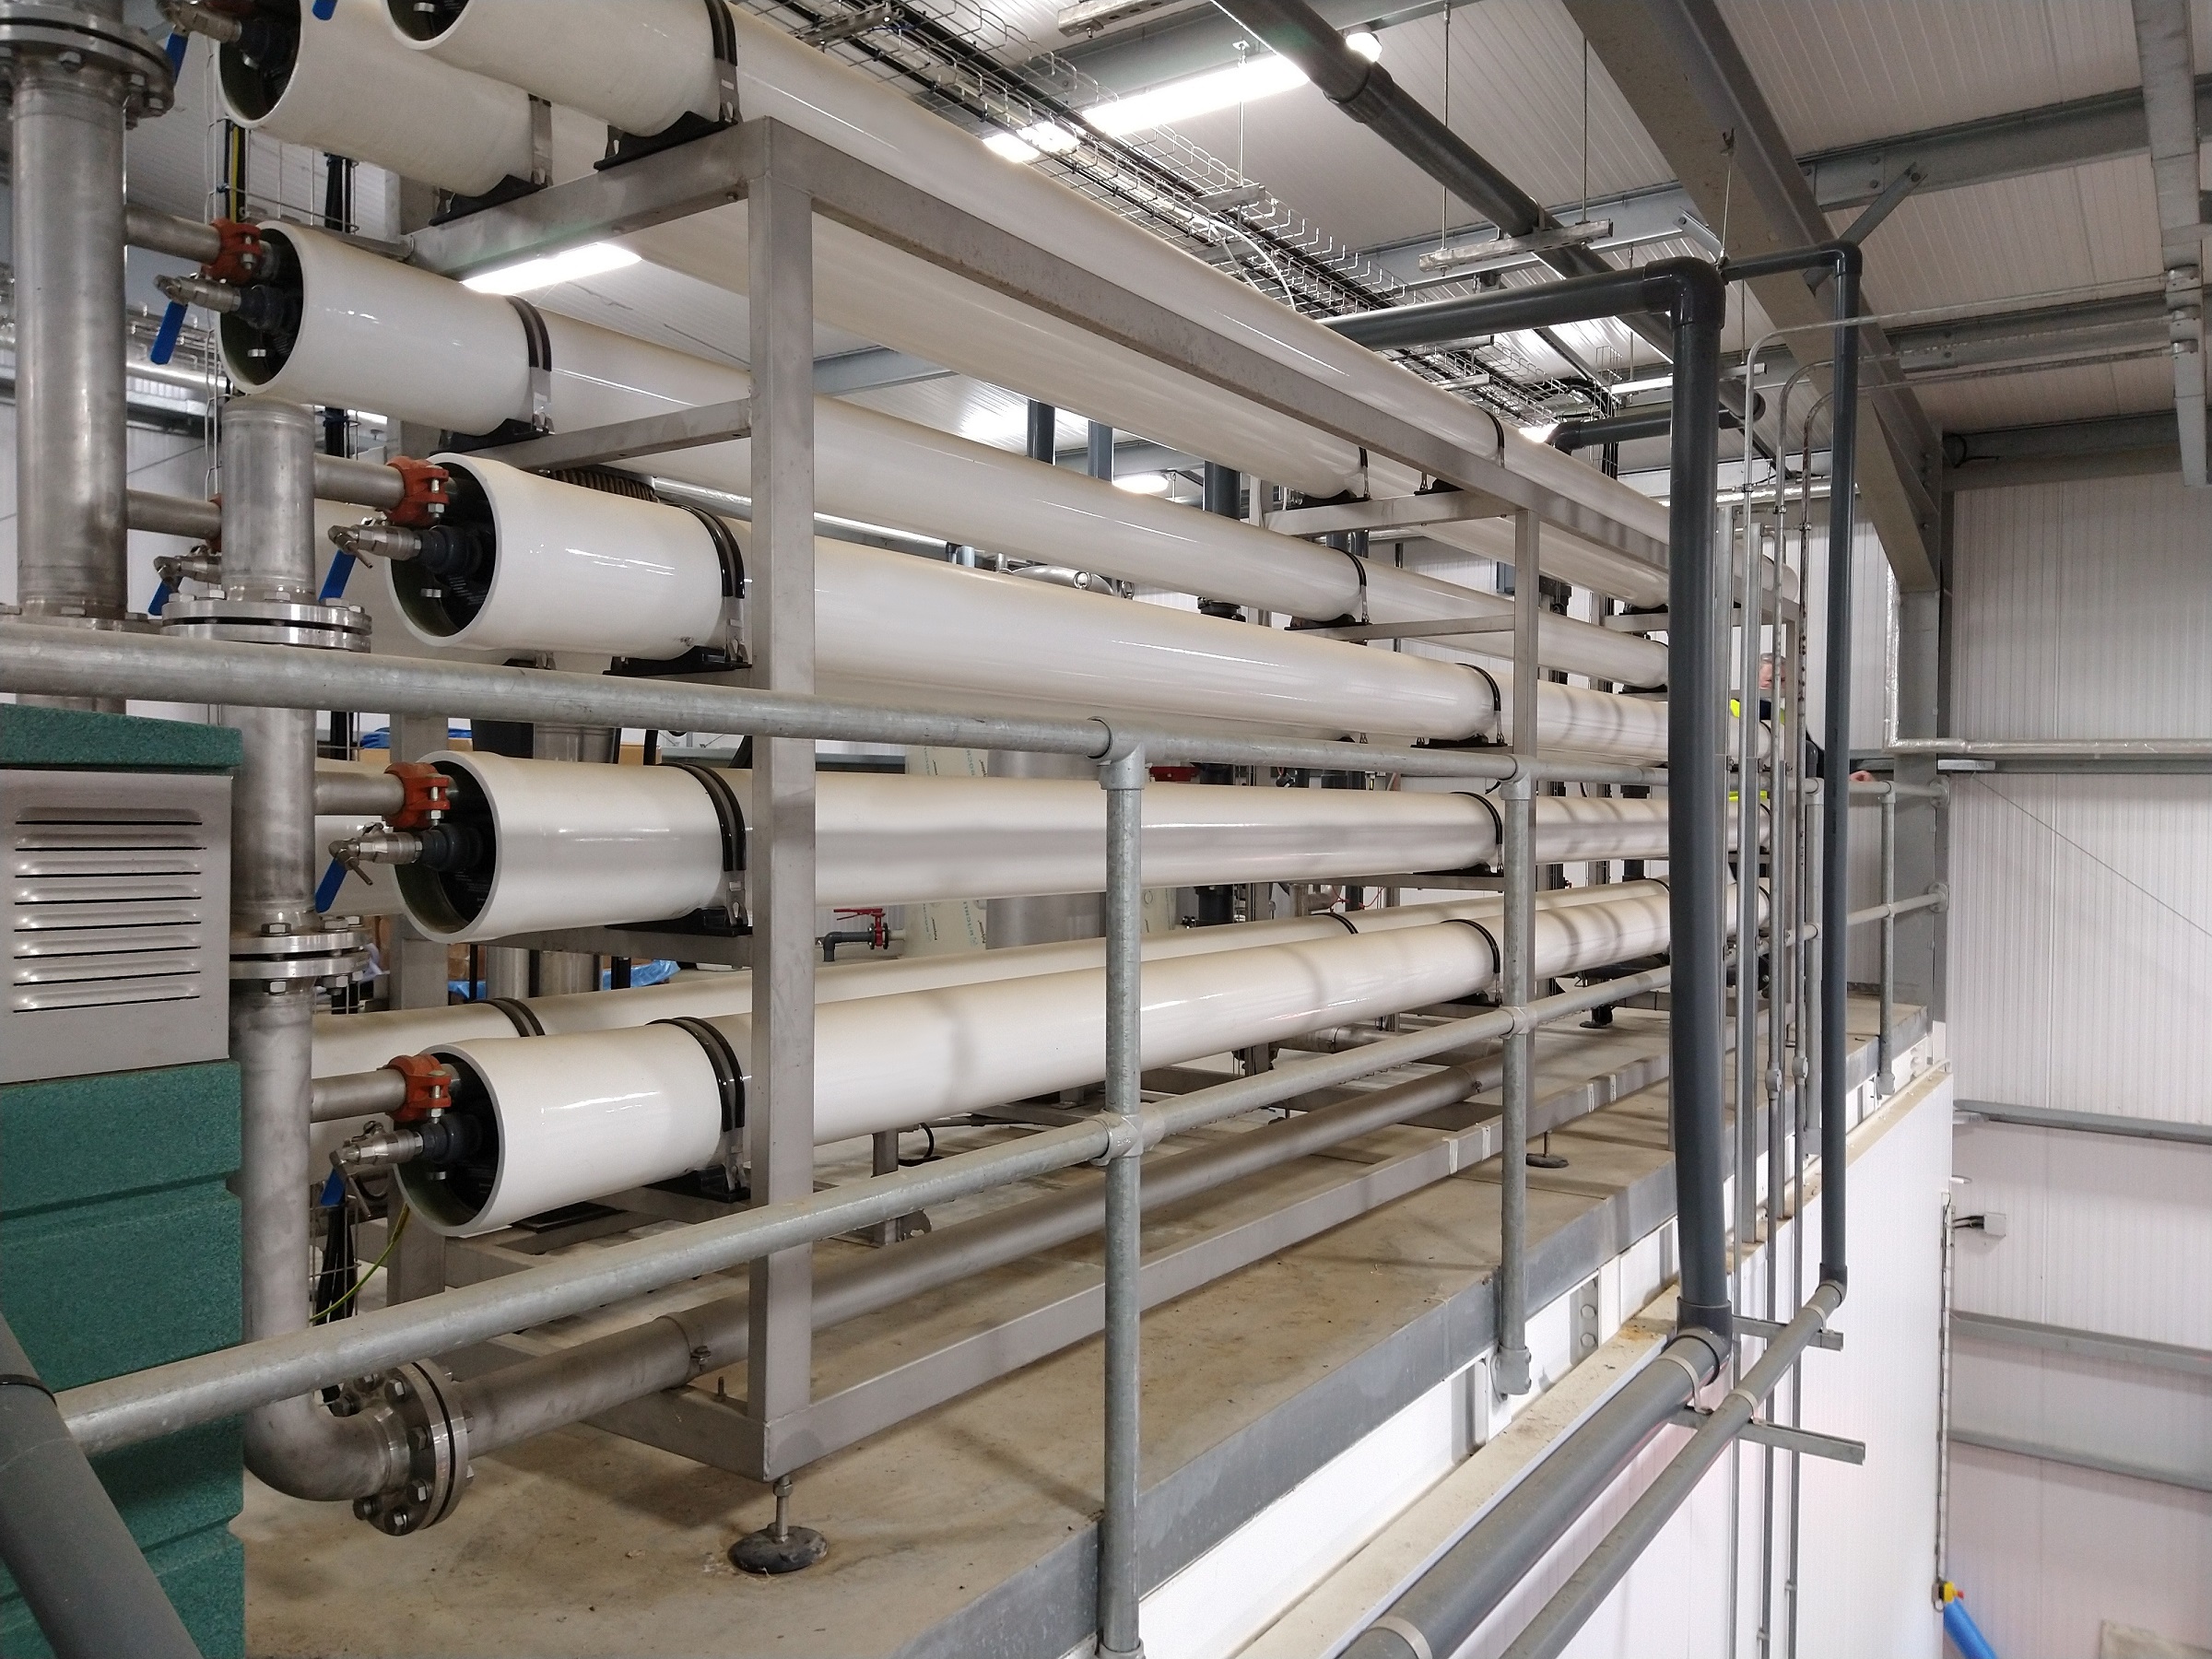 Cranswick relies on Marel's Water Treatment techniques